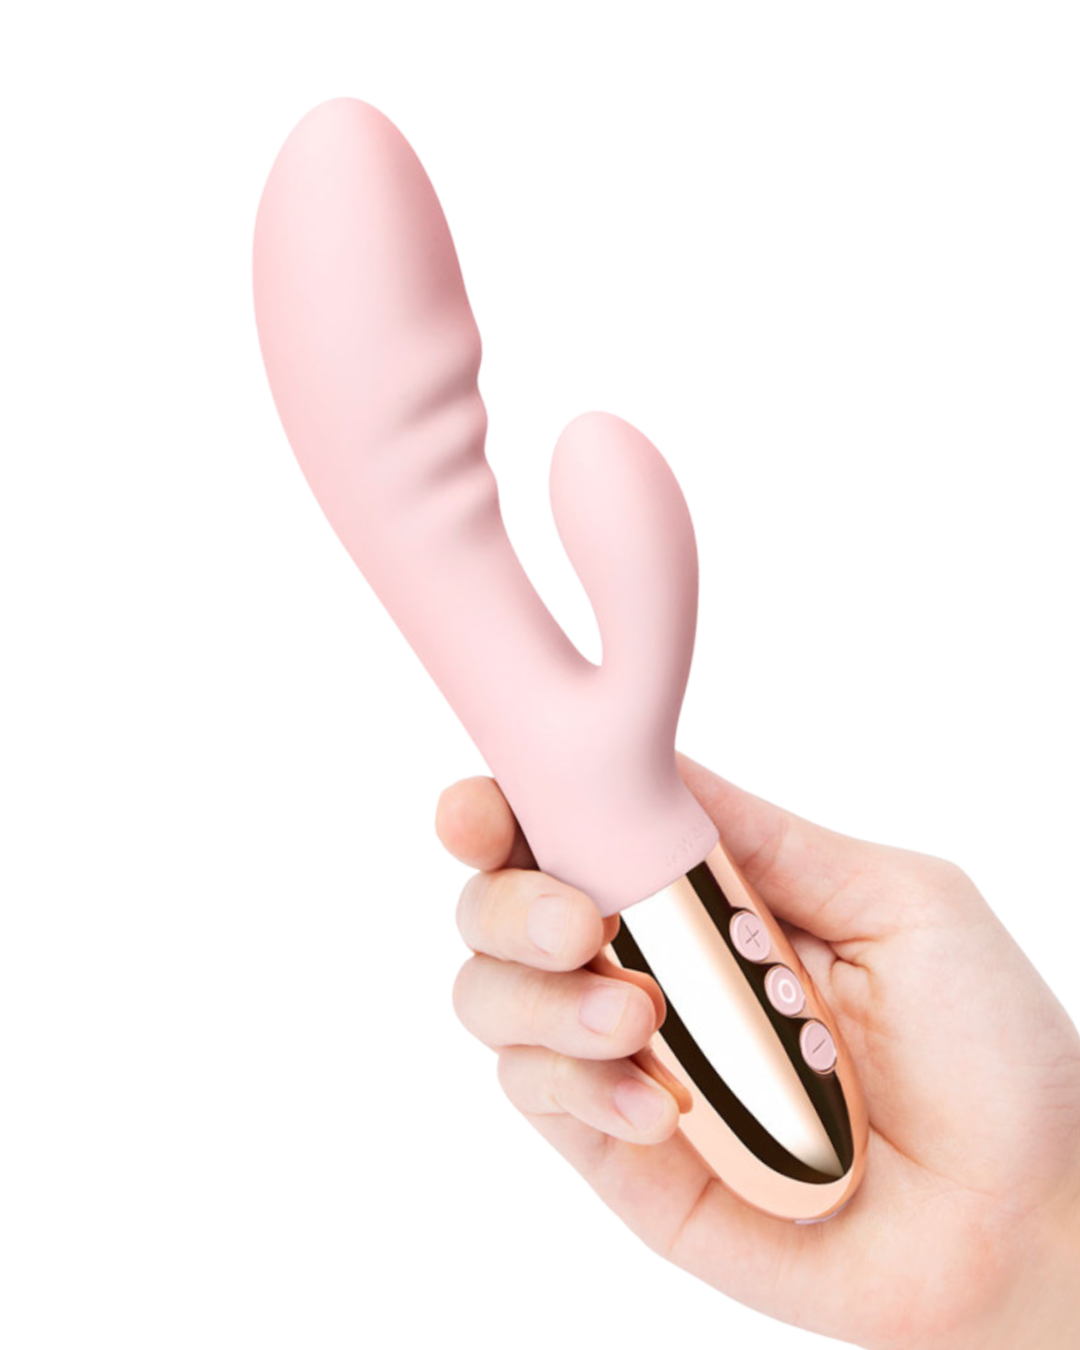 Le Wand Blend Double Motor Rechargeable Rabbit Vibrator - Rose Gold held in a hand